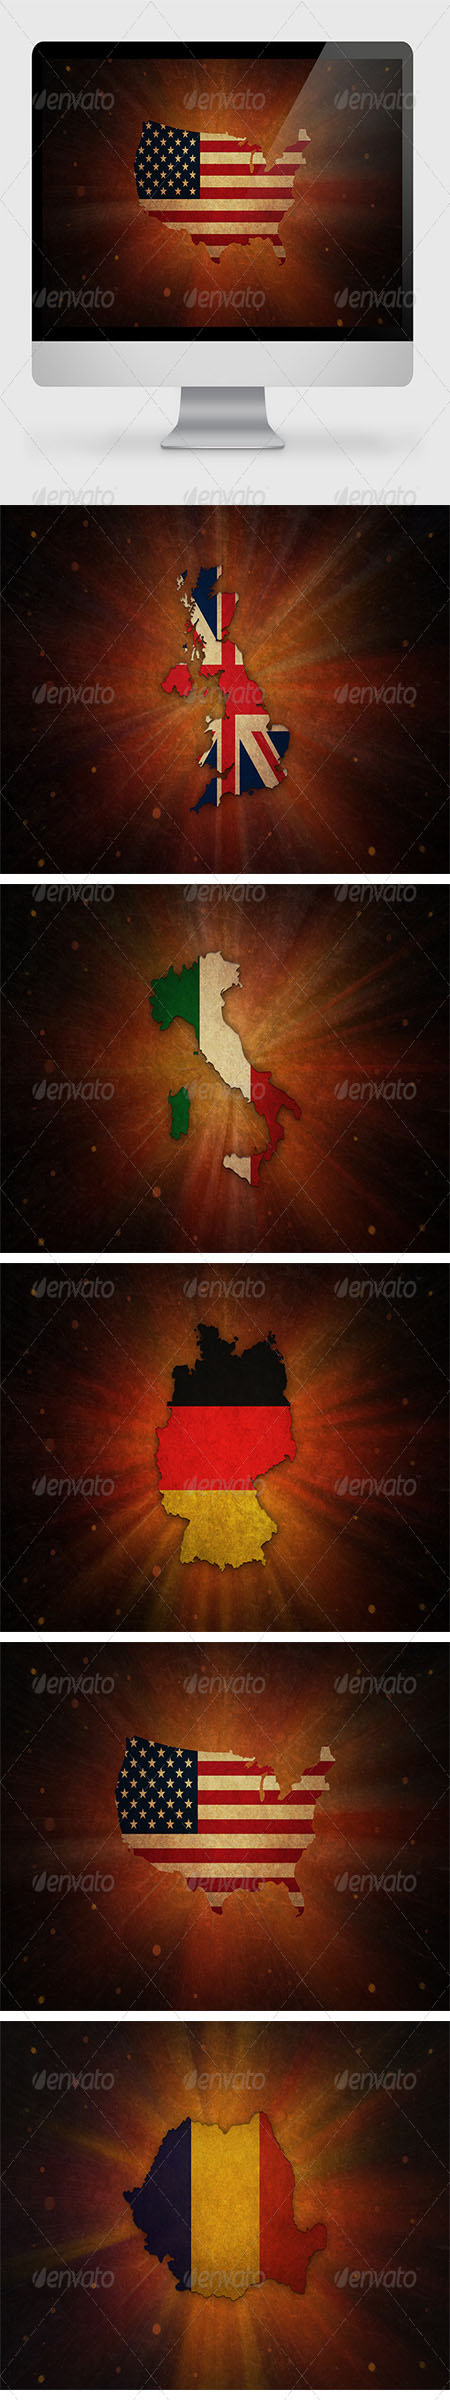 5 Countries Backgrounds